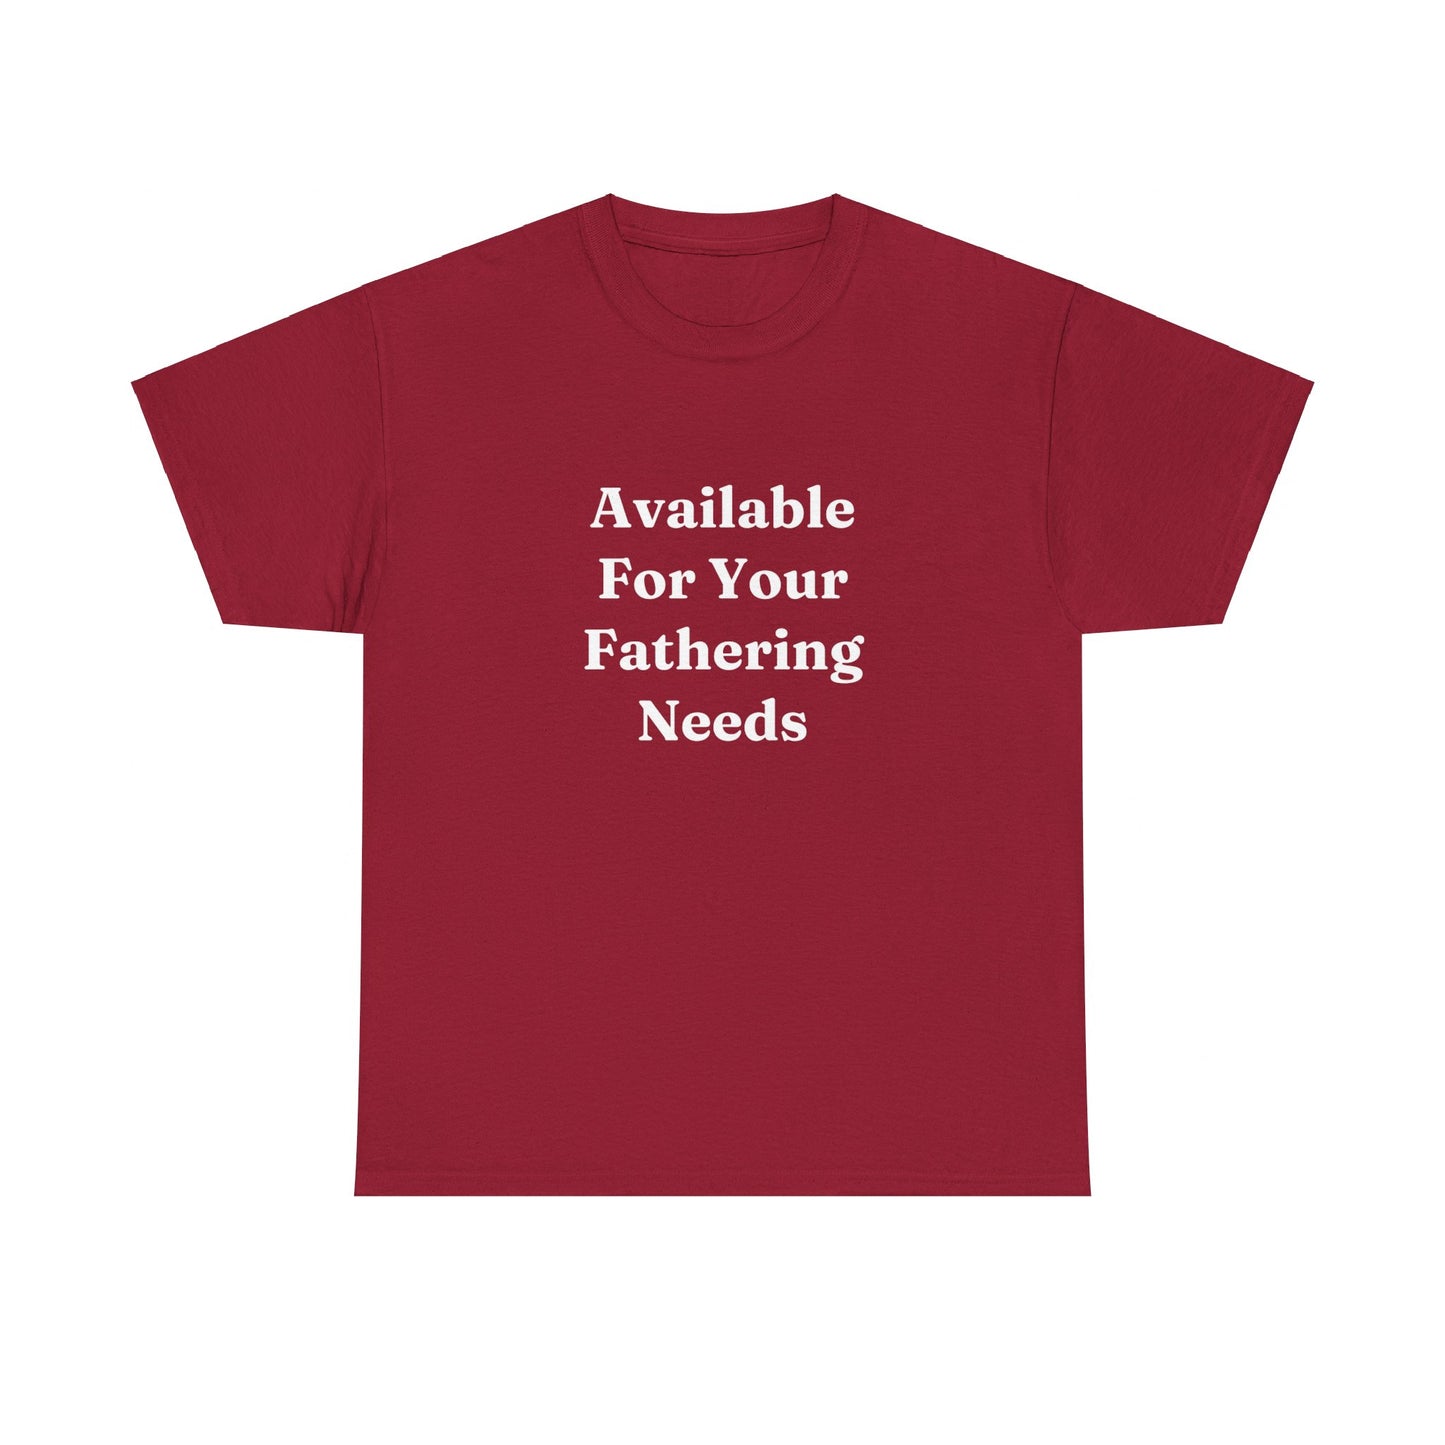 "Available For Your Fathering Needs" Shirt